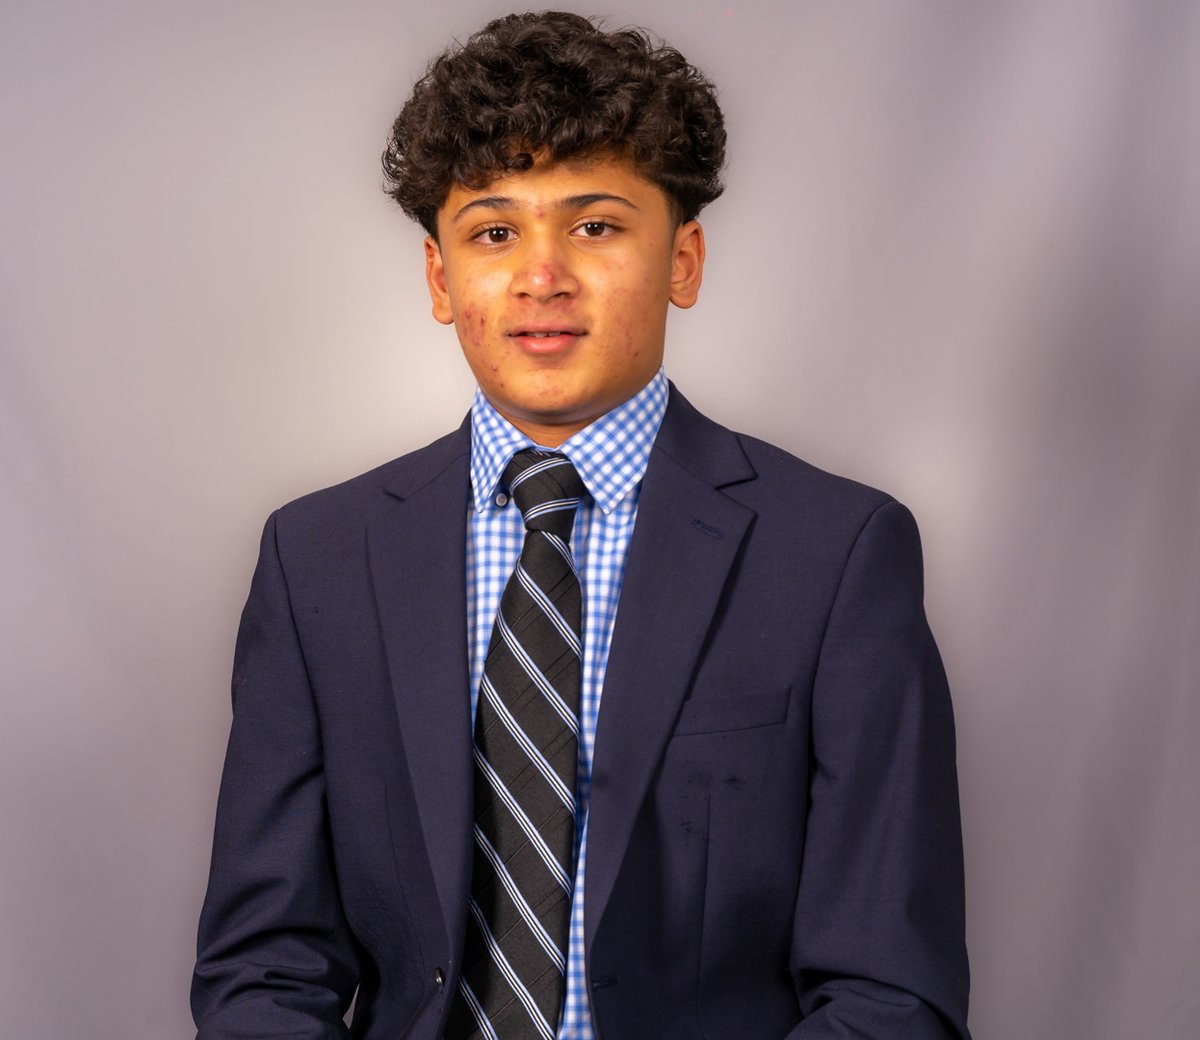 This month, we are featuring two CTAE students each day in anticipation of the CTAE Student of the Year Banquet on Tuesday 3/19, where we will announce 3 district winners. Congrats & good luck to Vijit Tatia, of @FCS_JCHS, who will represent the Marketing career cluster!